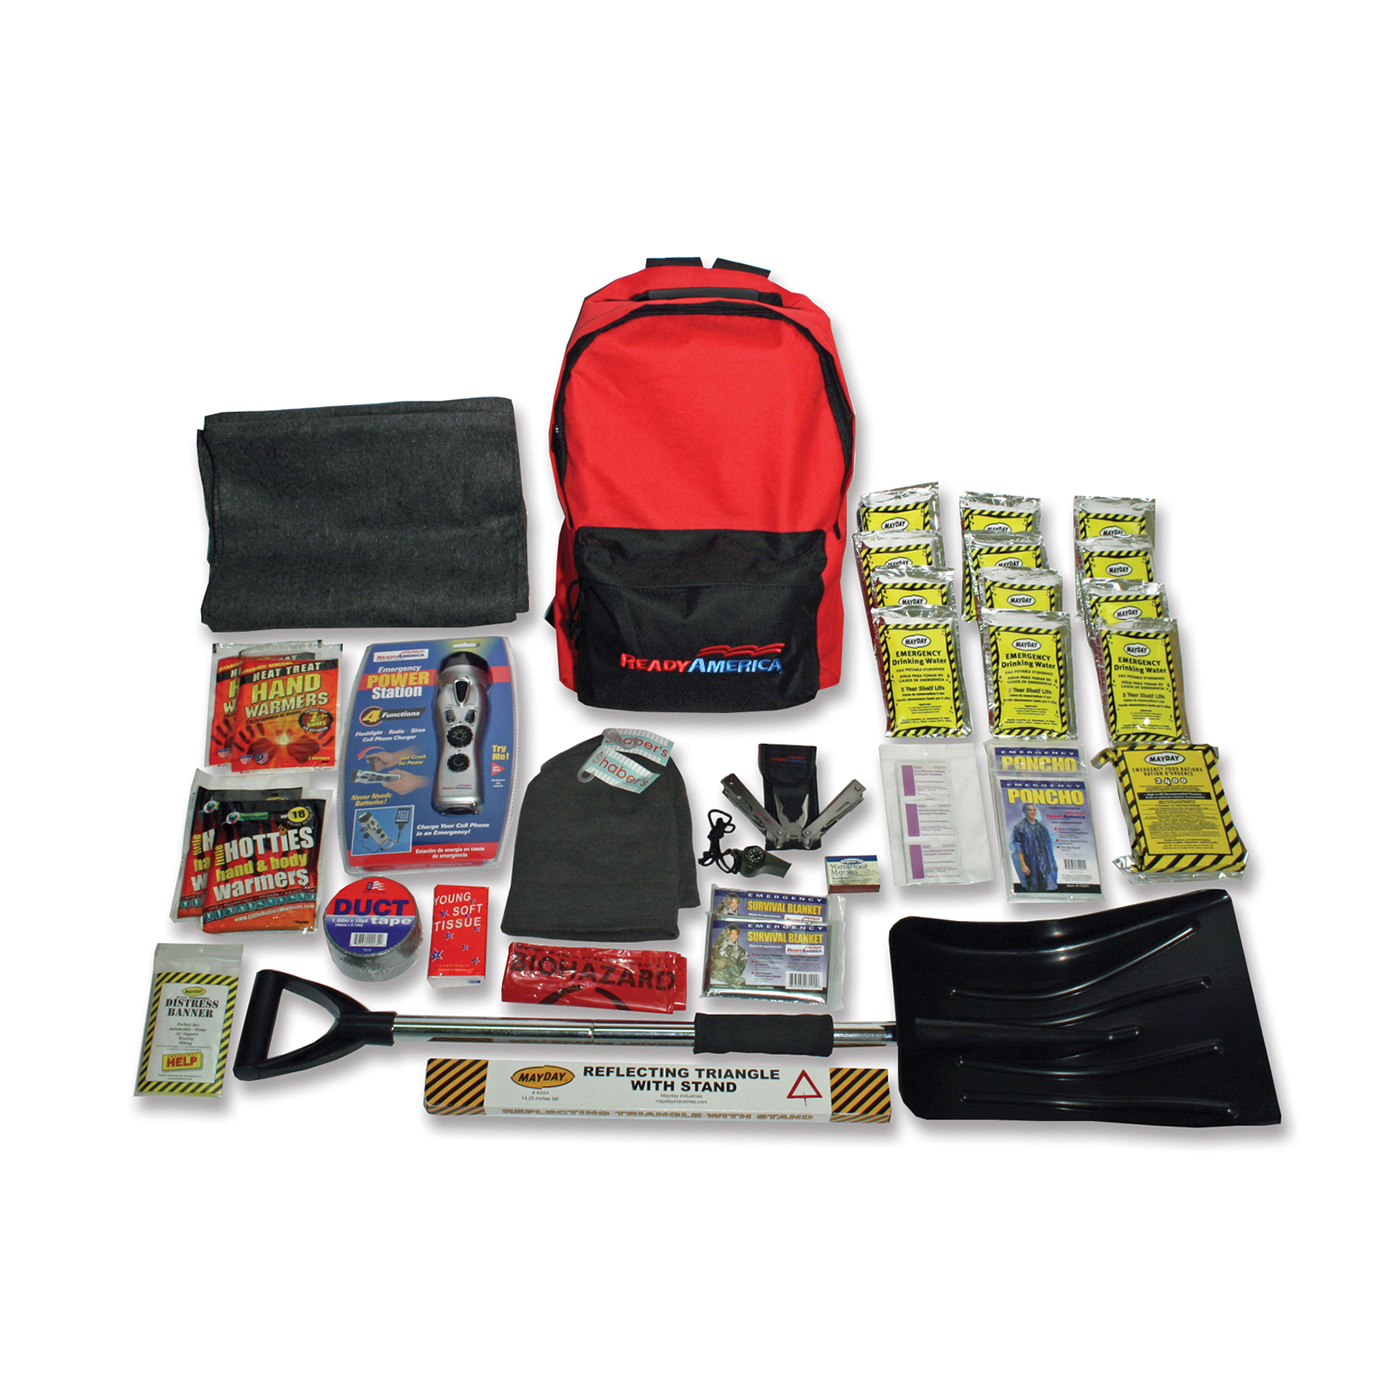 Ready America 70211 2 Person Outdoor Survival Kit 